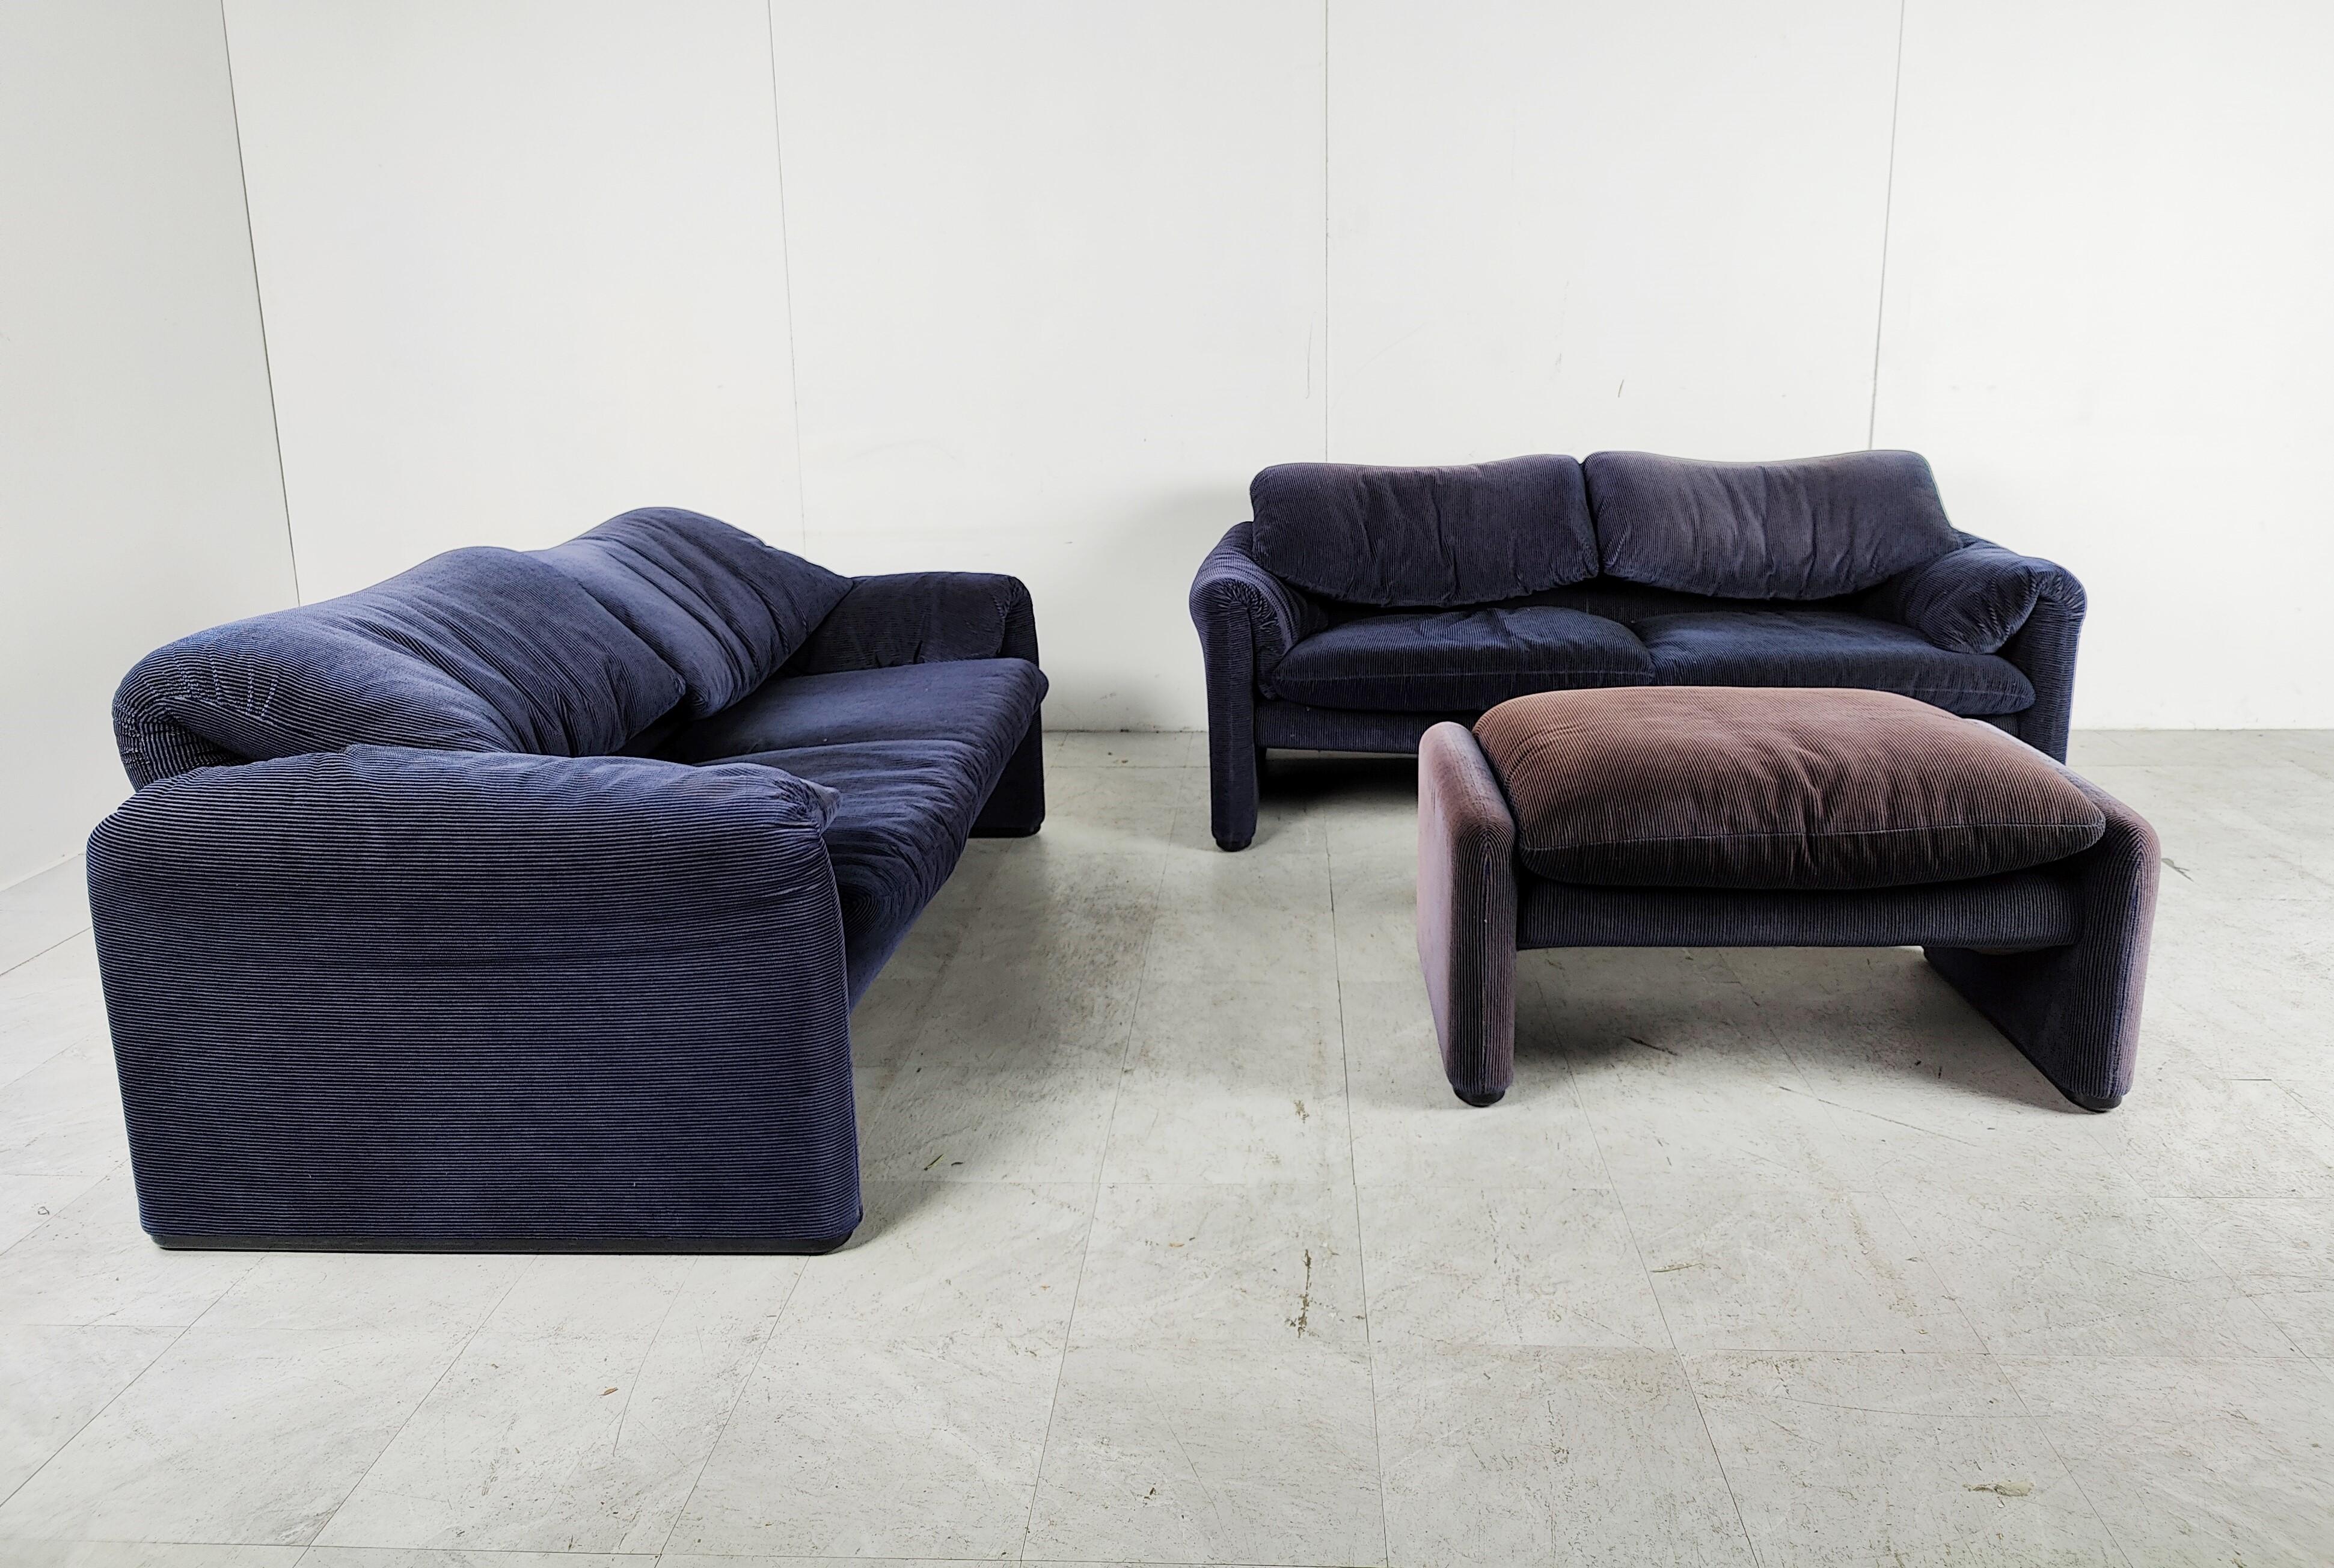 Vintage maralunga sofa, set of 2, designed by Vico Magistretti for Cassina in 1973.

This iconic design sofa is upholstered in its original blue striped upholstery, old cassina label.

Comes with its ottoman

The backrests are